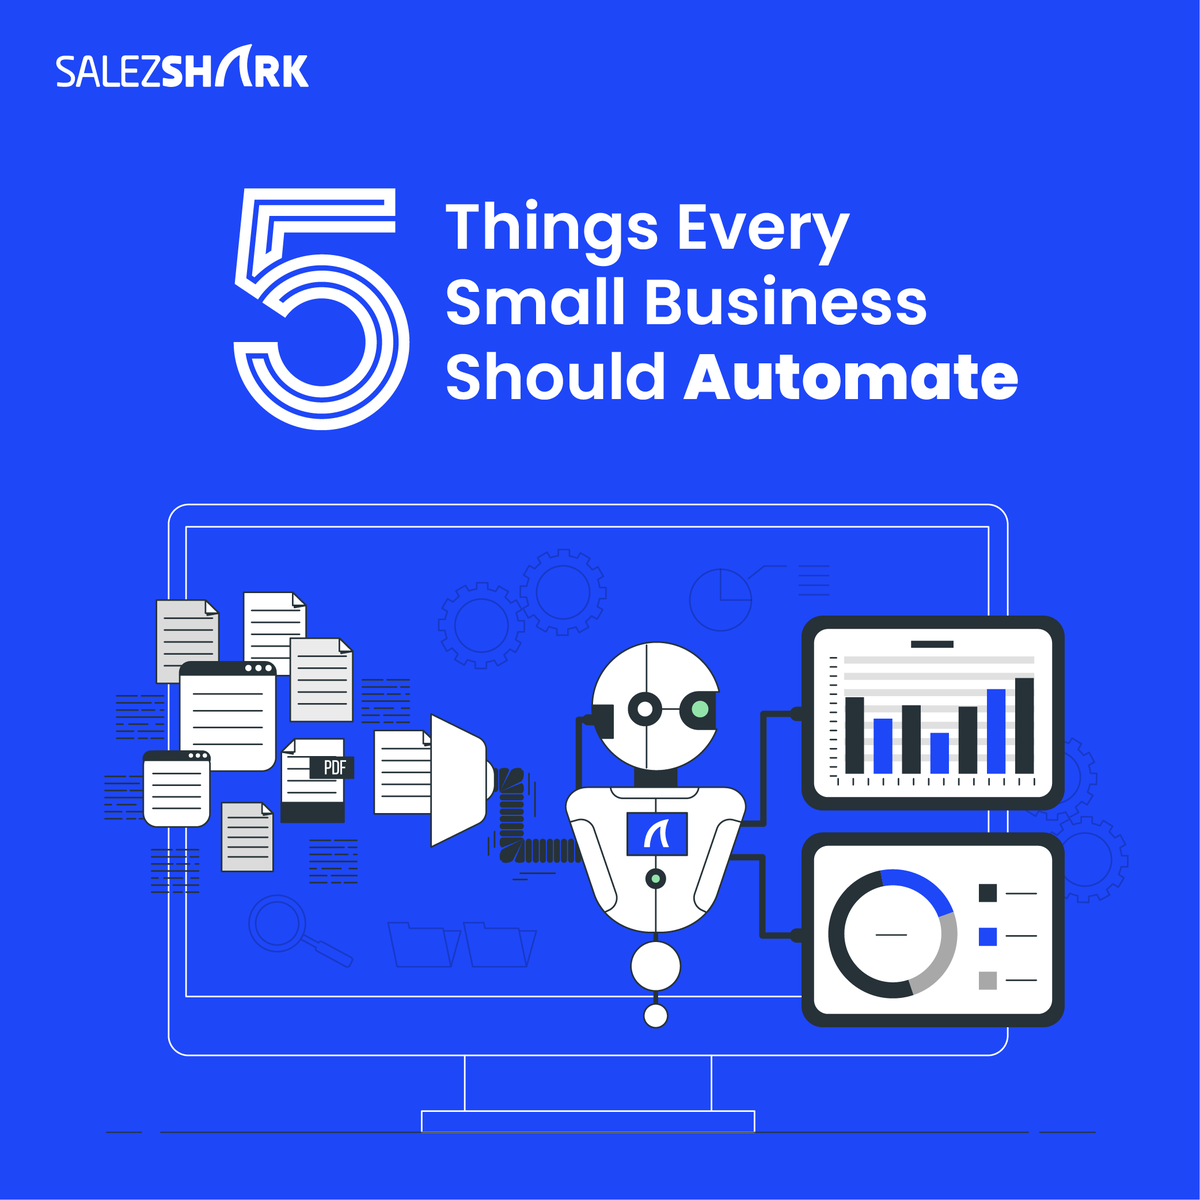 Here are 5 essential processes every small business should automate for increased productivity and growth:

1. Save time
2. Track sales
3. Manage leads
4. Manage email campaign
5. Streamline processes

#SmallBusinessAutomation #ProductivityBoost #GrowWithTech